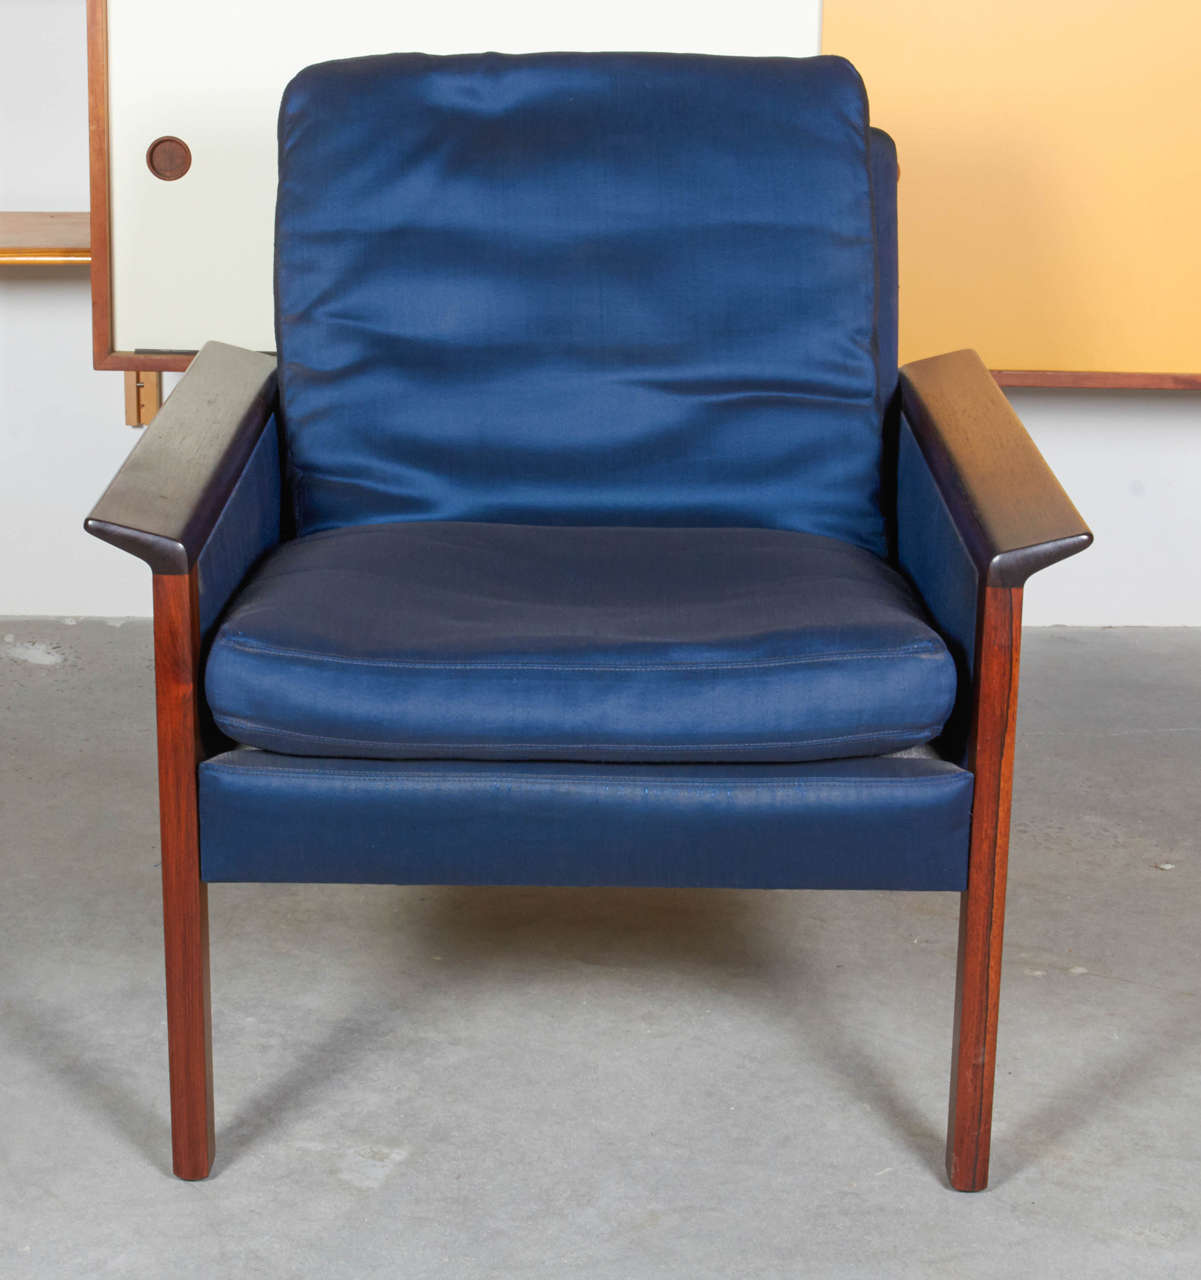 Vintage 1960s Upholstered Club Chair by Hans Olsen

This Rosewood Danish Arm Chair is in excellent condition. The raw silk fabric could use a dry-cleaning, but then I think you are good to go. We also can help you with reupholstery if you love the